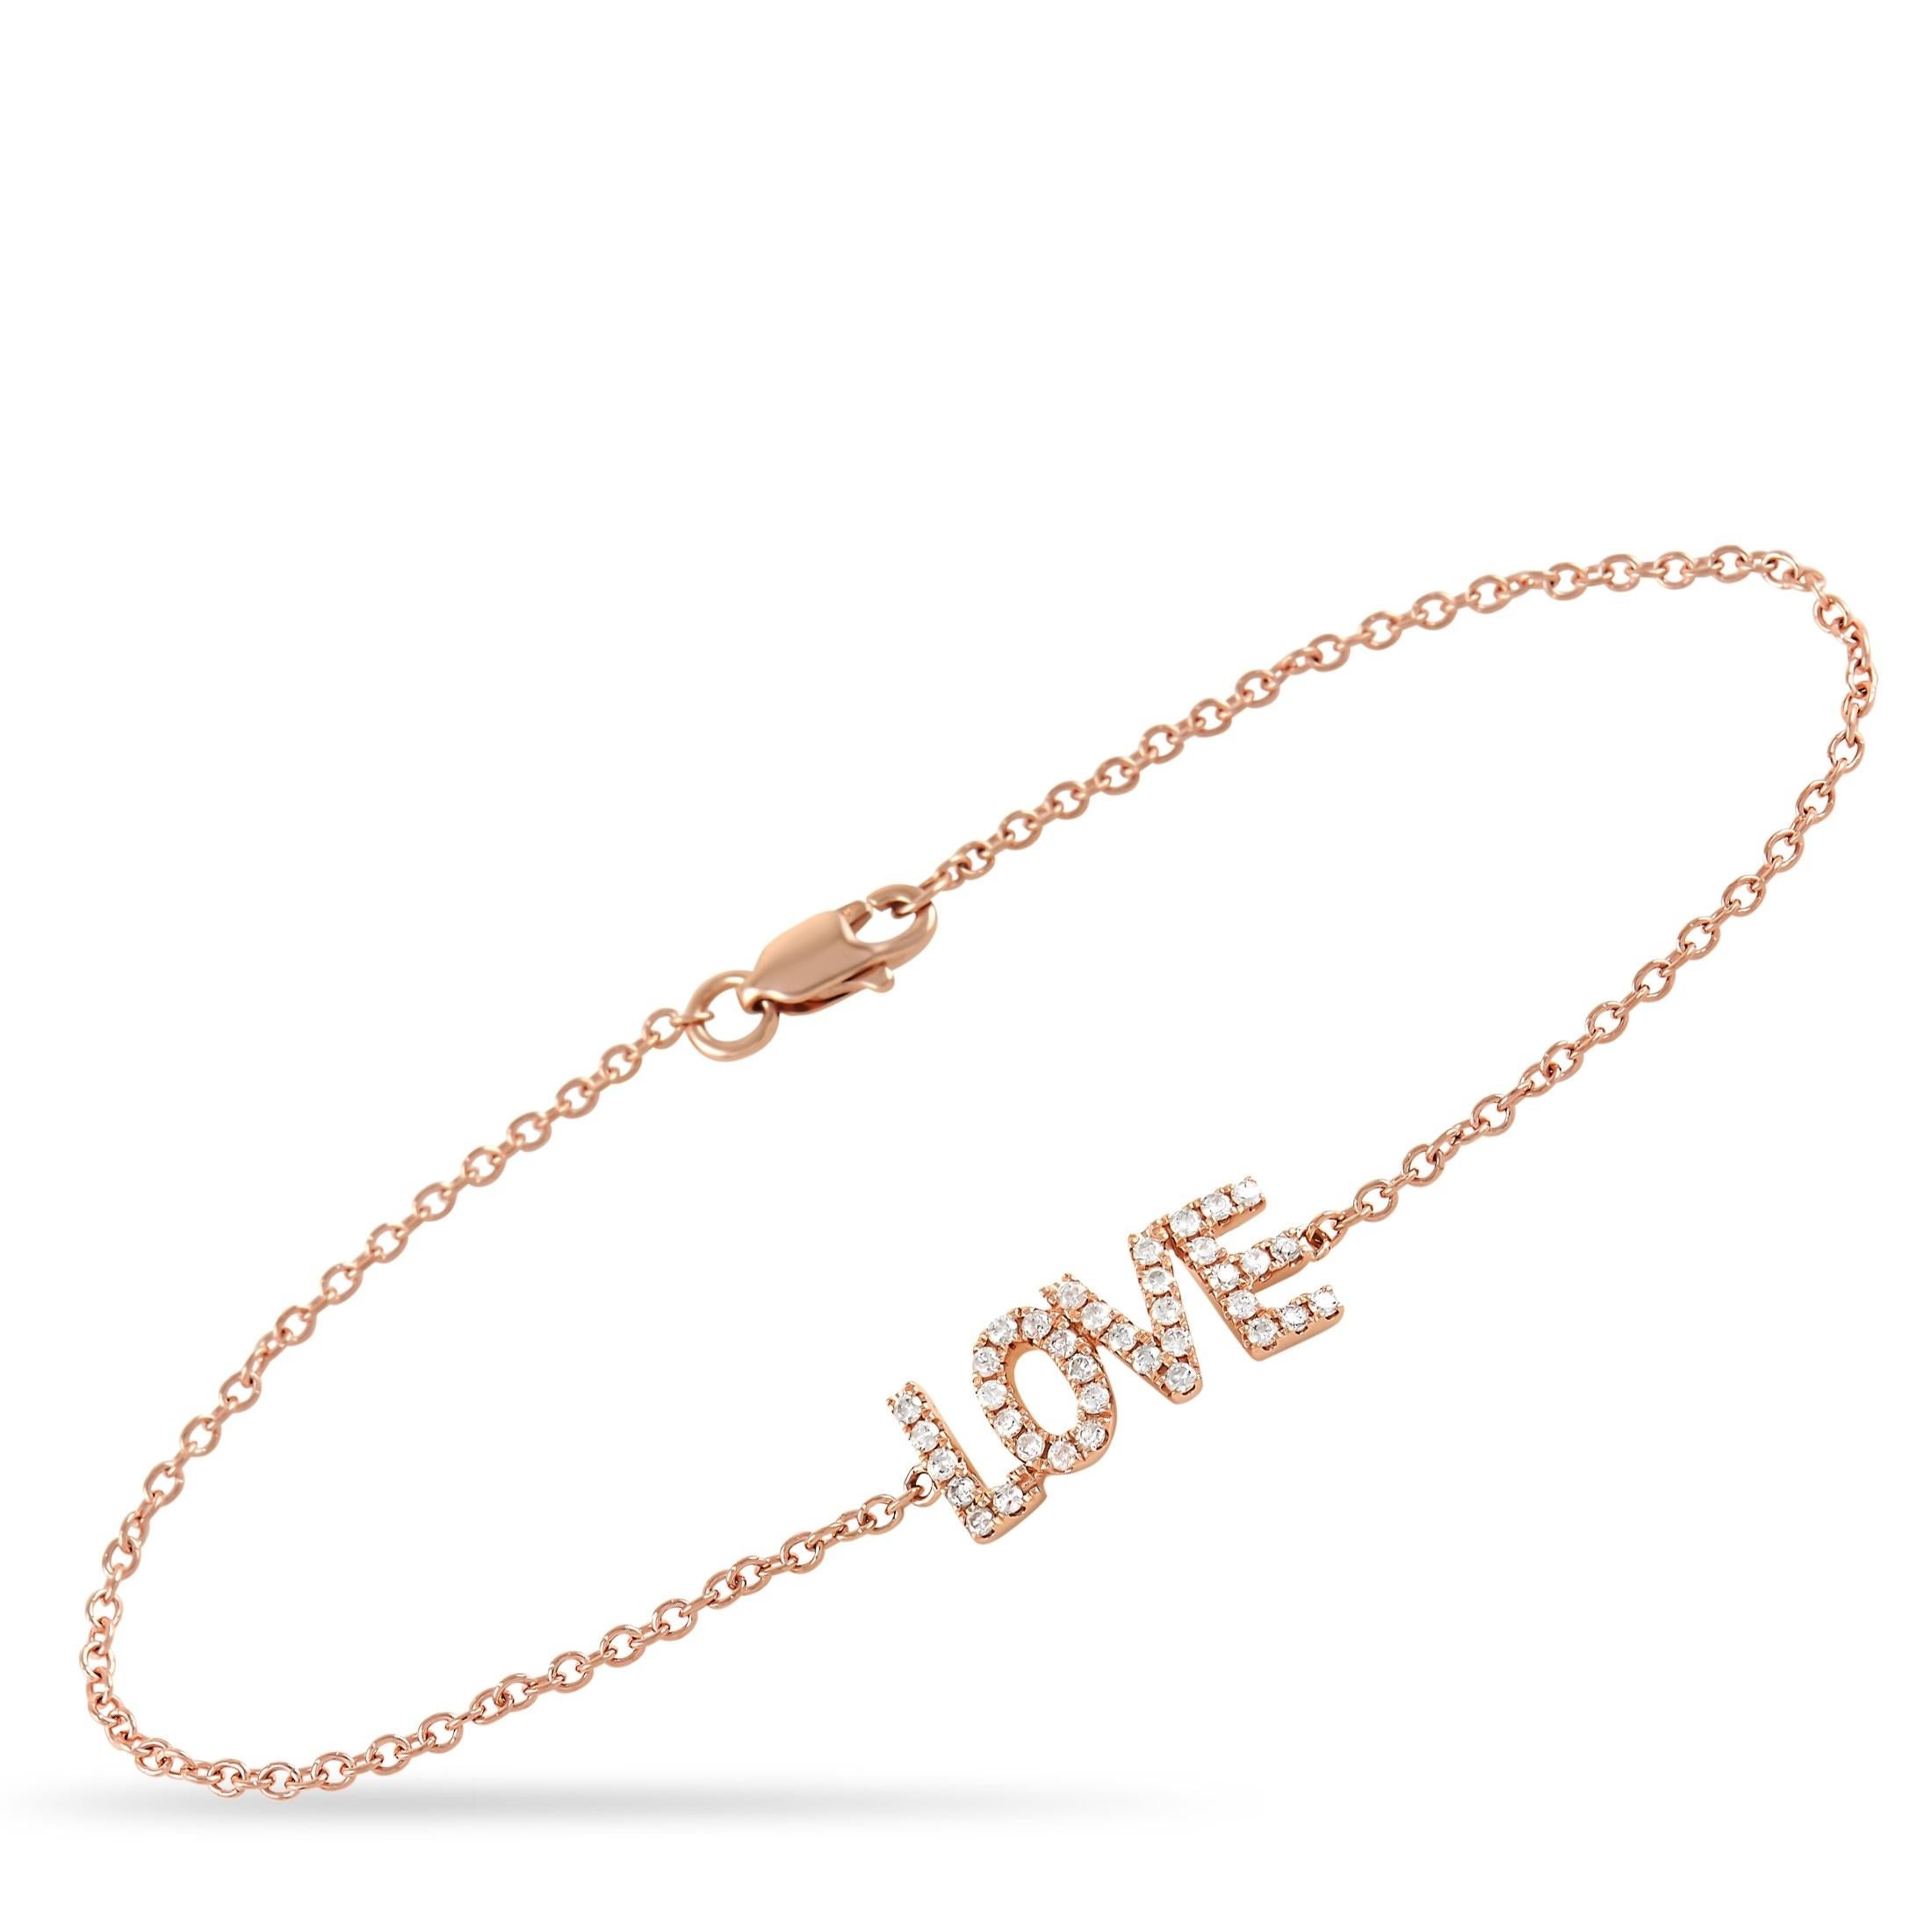 This romantic piece of jewelry is the perfect gift for your beloved. Set within stylish 14K Rose Gold, you’ll find a “LOVE” charm accented by diamonds with a total weight of 0.25 carats. It measures 7” long and includes secure lobster clasp closure.